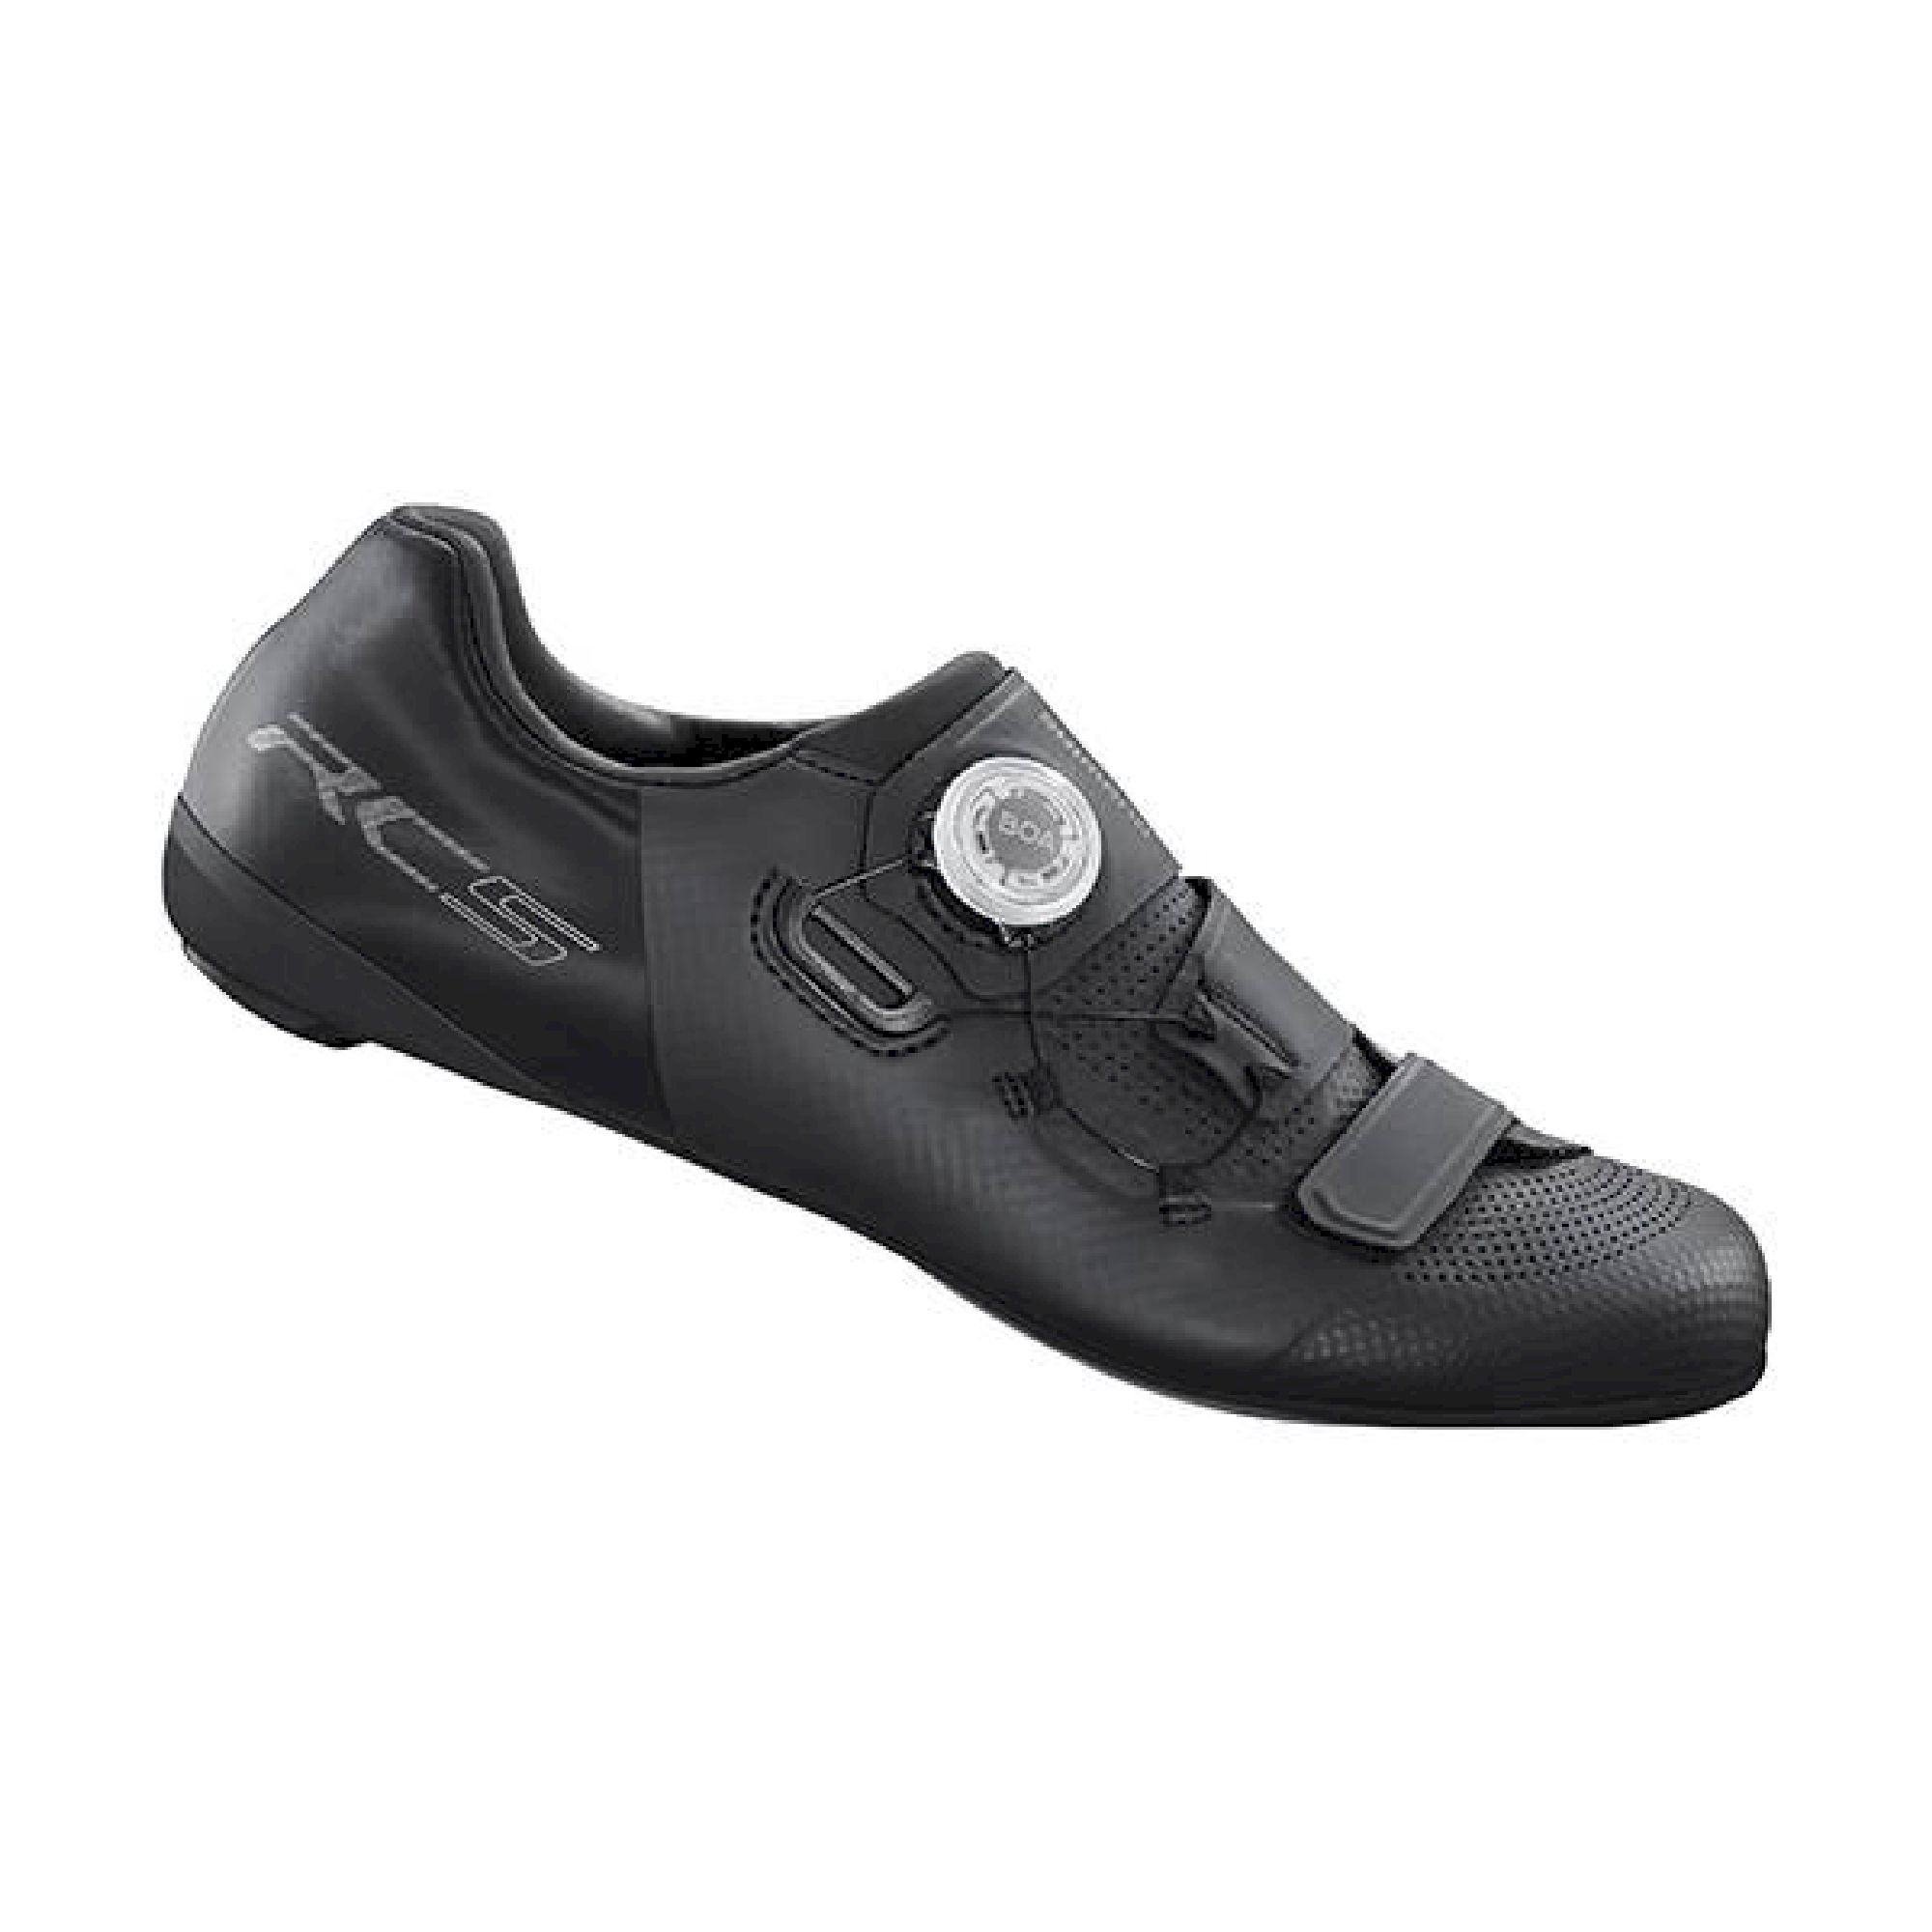 Shimano Route RC502 Large - Cycling shoes - Men's